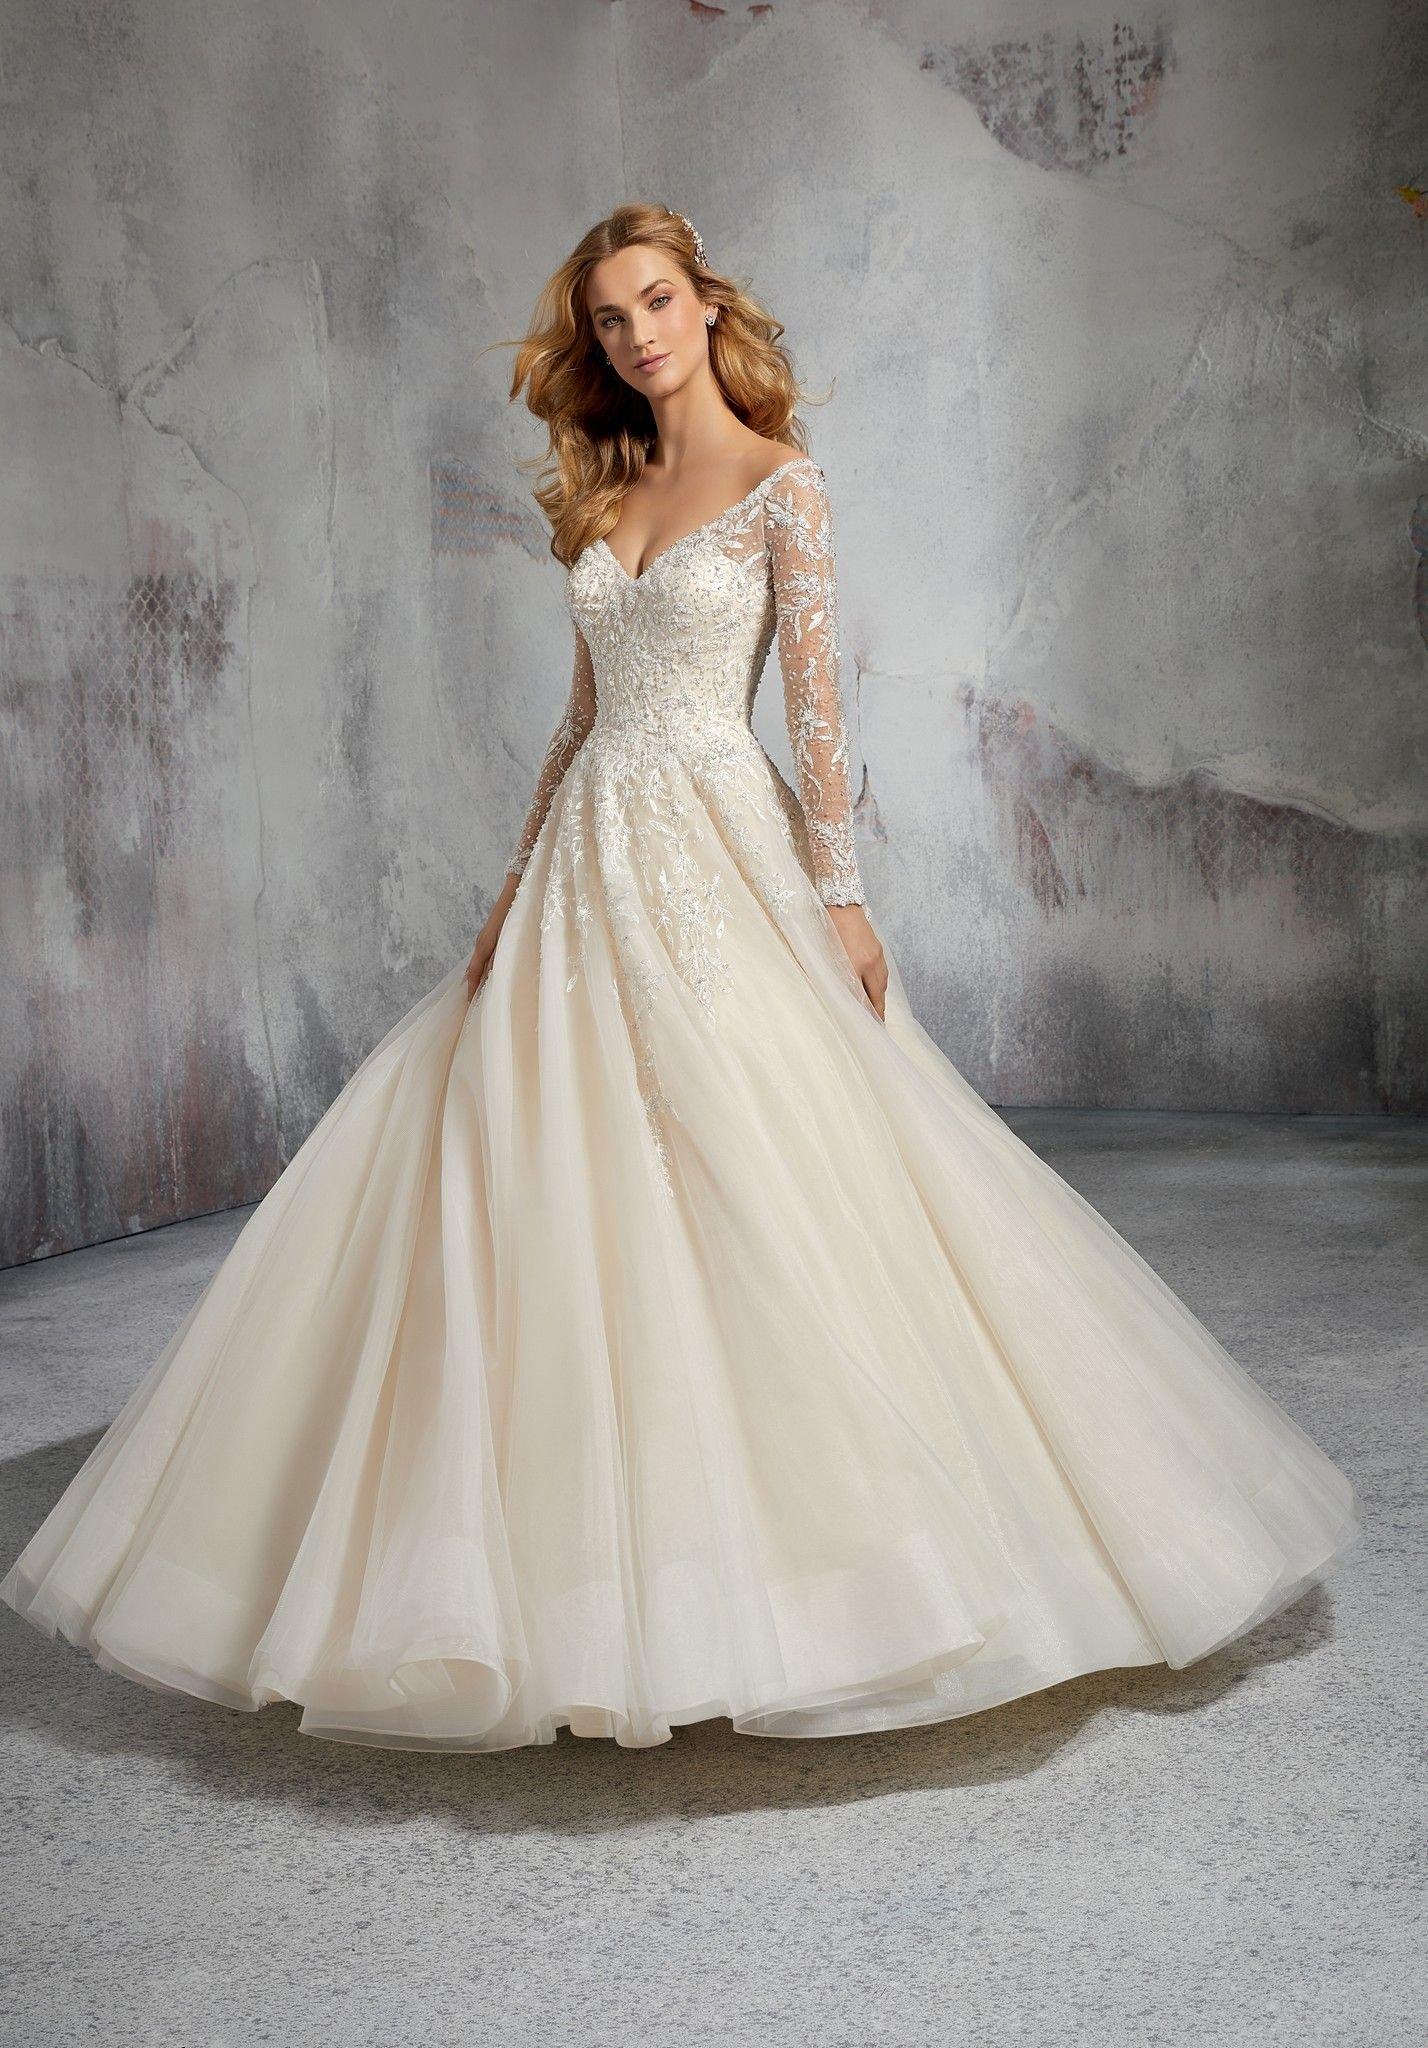 41 Best Winter Wedding Dresses 2021 hitched.co.uk hitched.co.uk